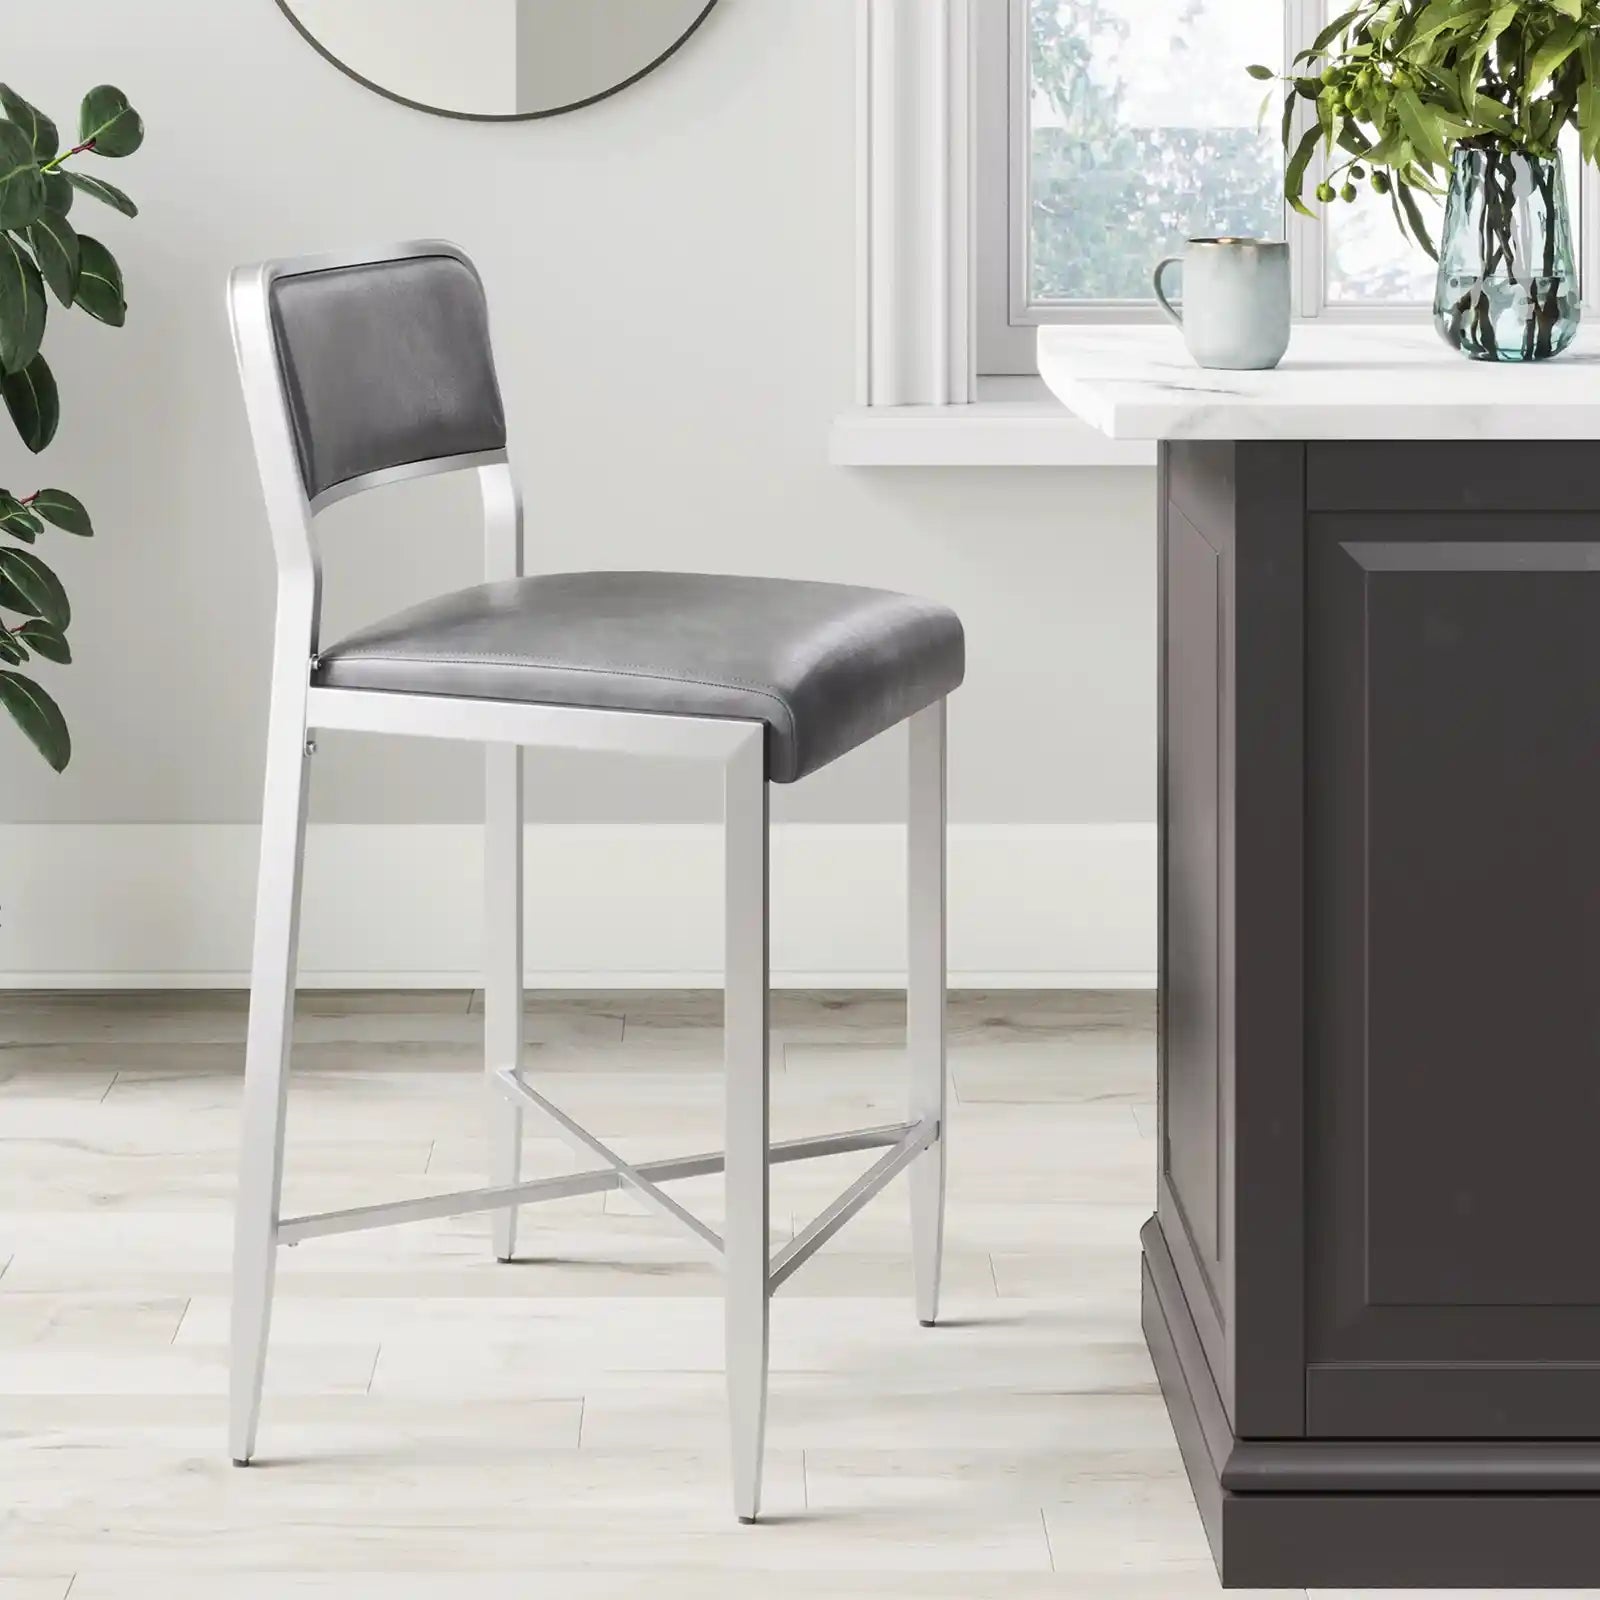 24 Inch Counter Bar Stool Set of 2, Gray Faux Leather Seat Silver Metal Frame